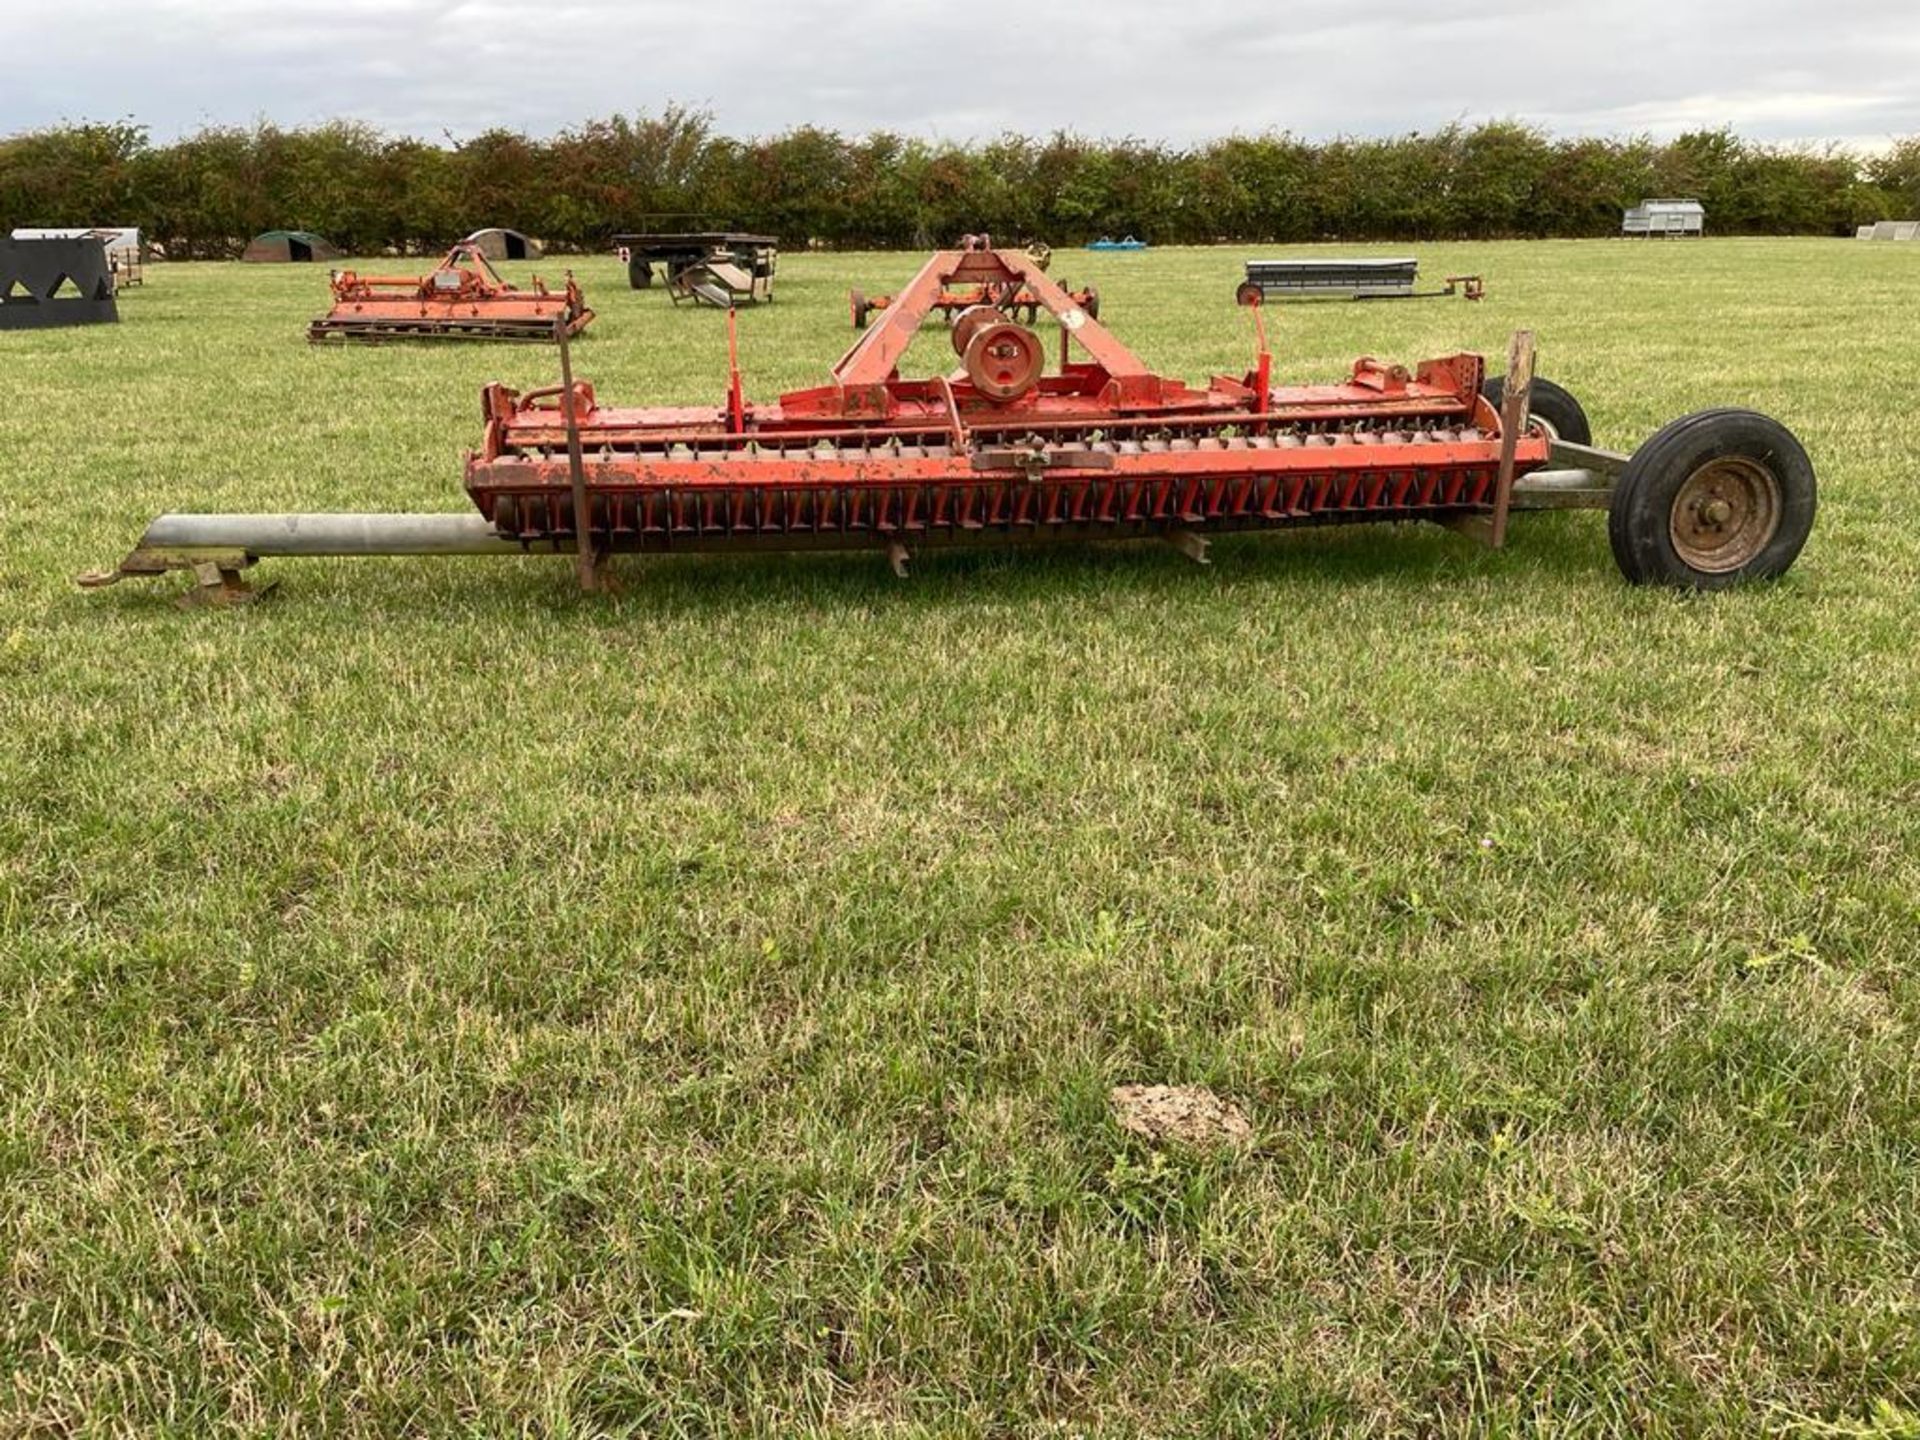 Kuhn HR4001 power harrow with rear crumbler and end tow kit comes with low loader trailer, PTO drive - Image 3 of 4